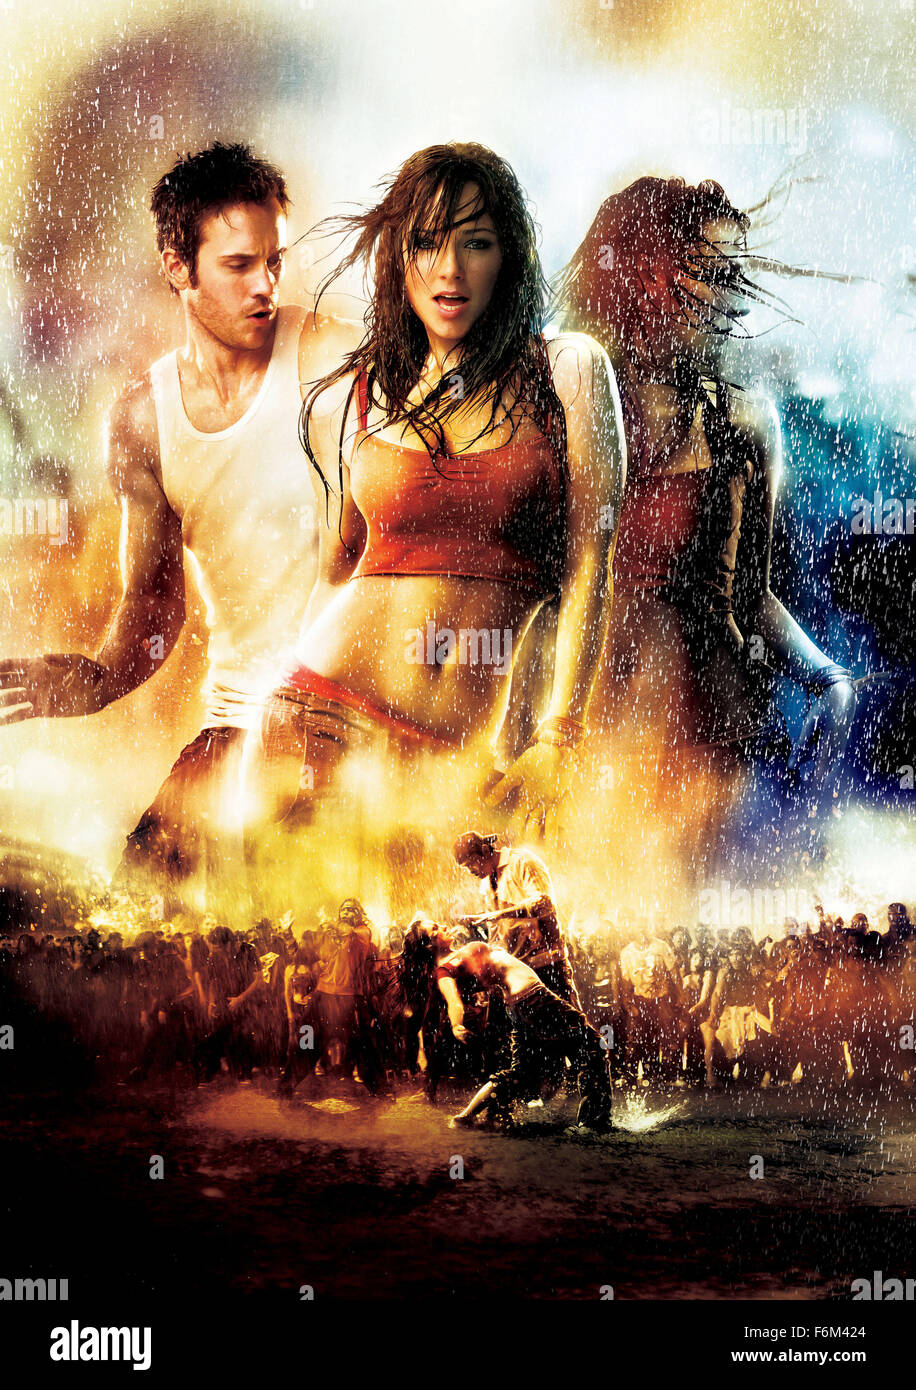 RELEASE DATE: February 14, 2008. MOVIE TITLE: Step Up 2: The Streets. STUDIO: Touchstone Pictures. PLOT: In Andie's first class she is told to improvise, only used to upbeat music, she panics and makes a fool of herself, then when told to do it again she messes up again.Only this time catching the eye of Chase.she is made to attend after school classes- at the same time as the 4 1 0 's dance rehearsal .After the lesson she heads down to rehearse with the crew, and she's late not impressing her fellow crew members. After being late yet again and after mssing most rehearsals Andie is kicked out Stock Photo